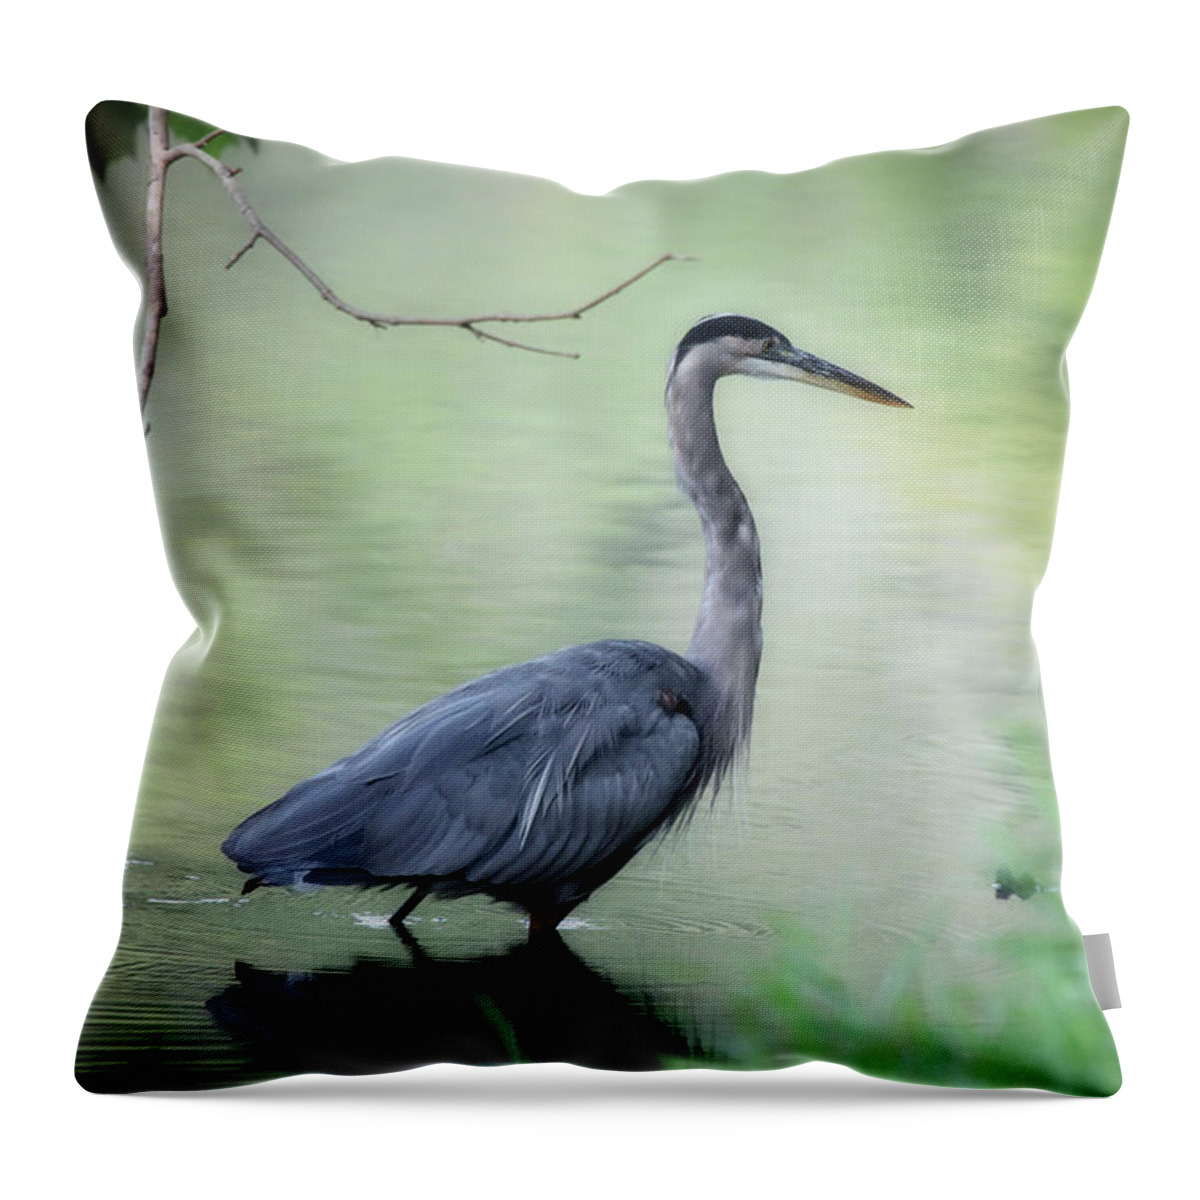 Great Throw Pillow featuring the photograph Great Blue Heron by Scott Burd